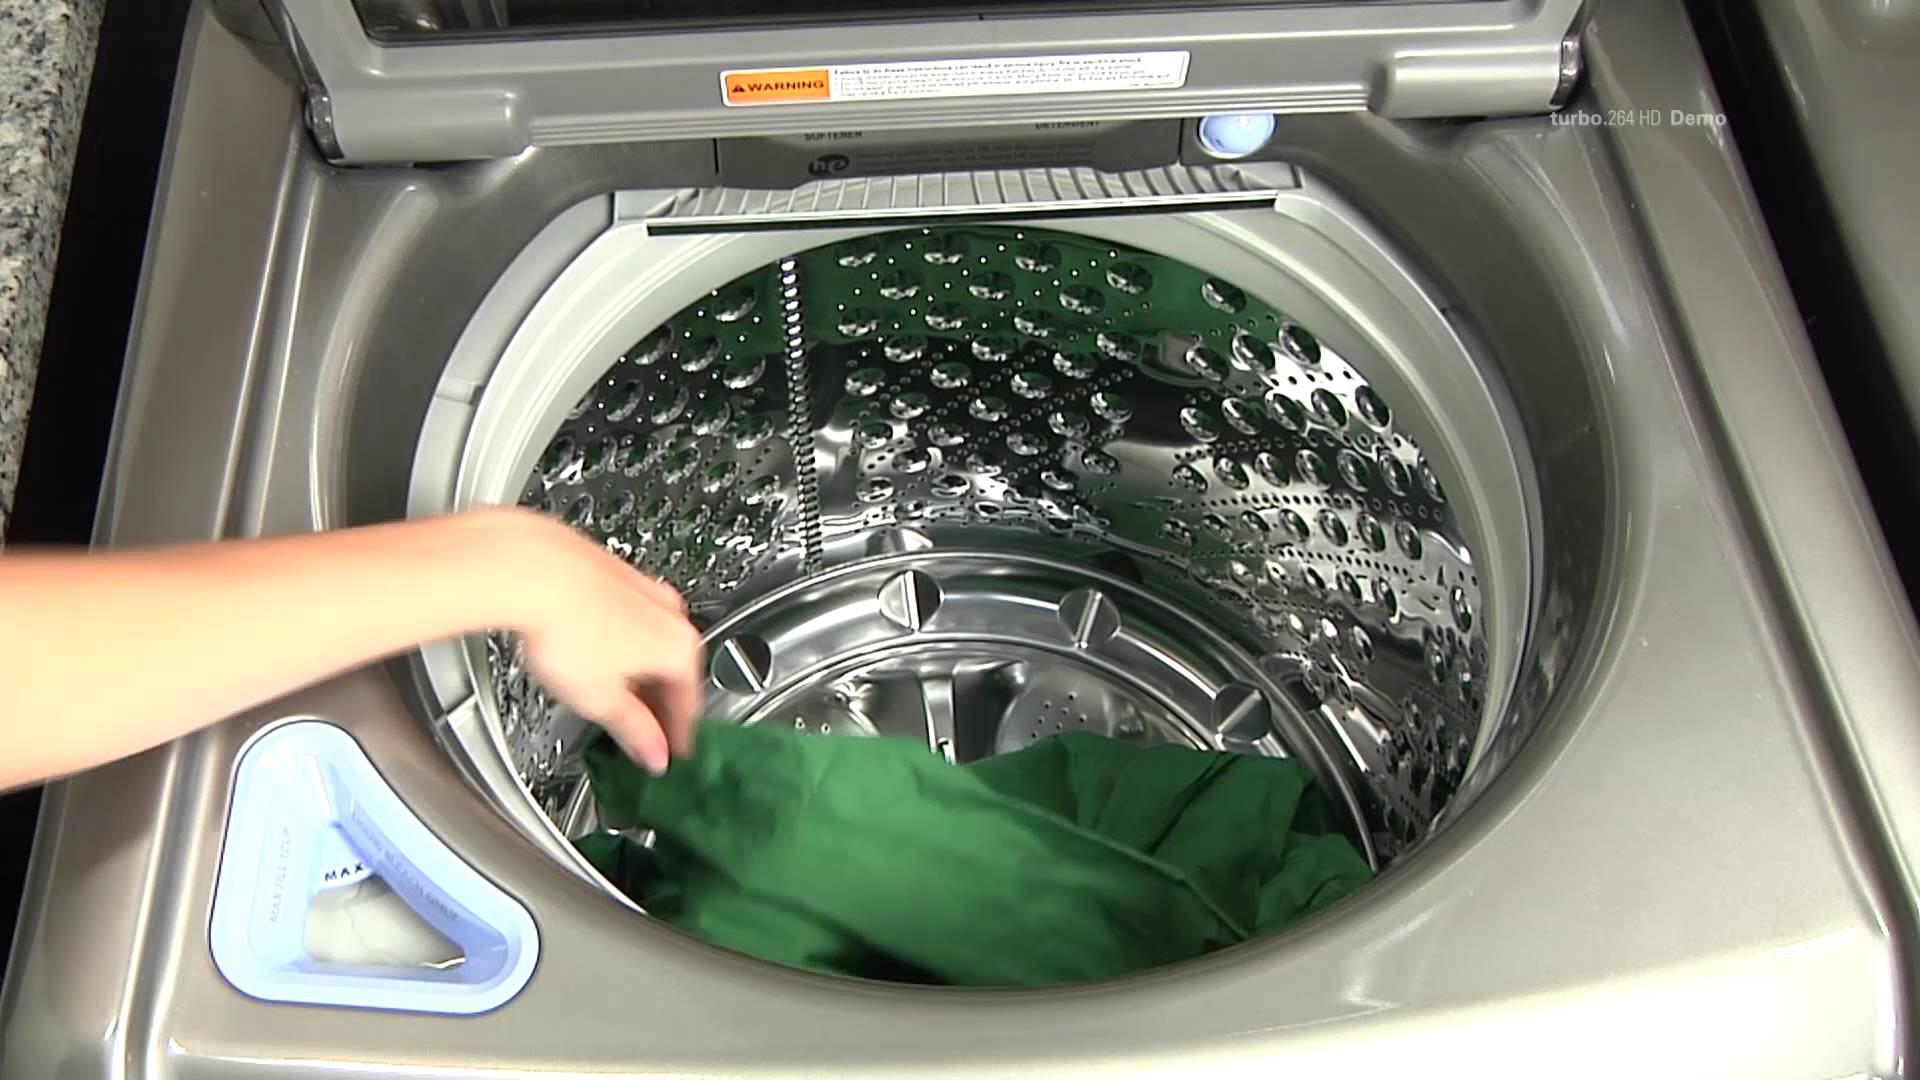 What is the Drum of a Washer? 